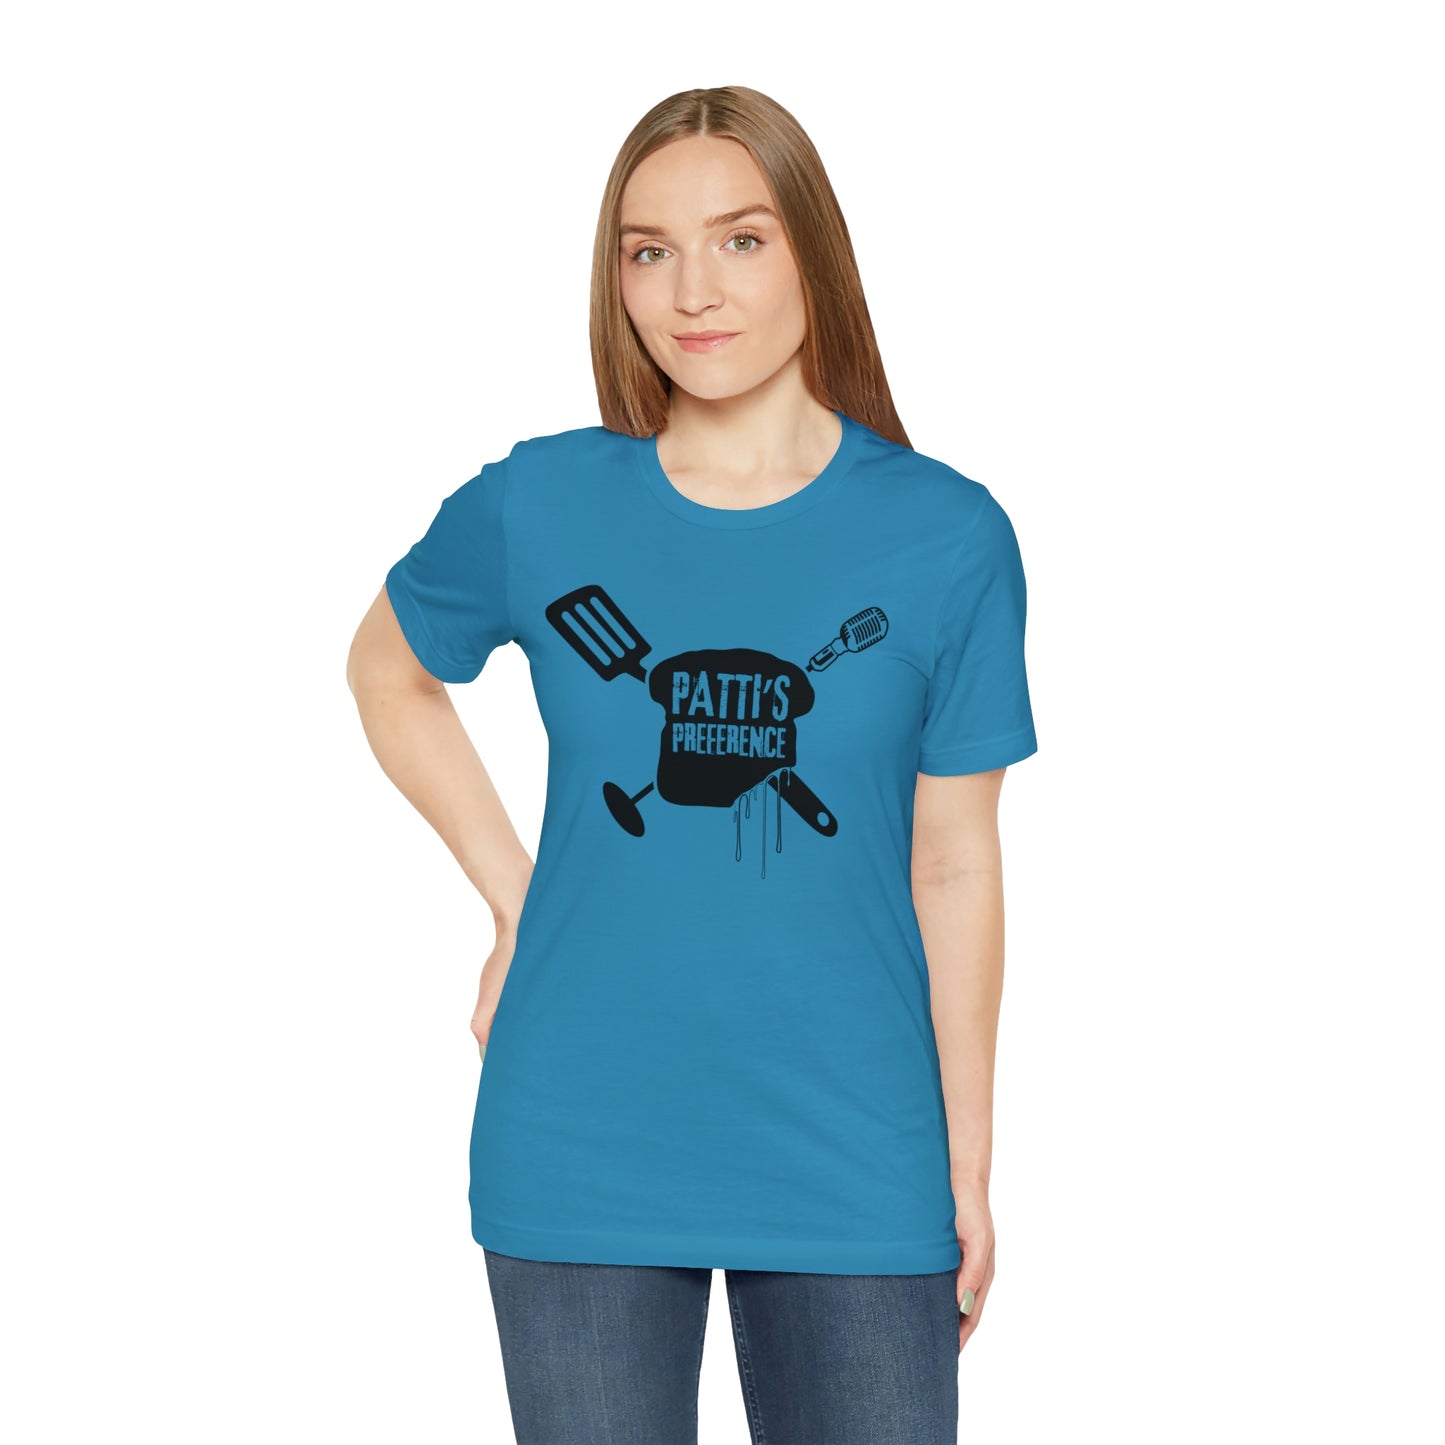 Pattis Preference Official Unisex Tshirt